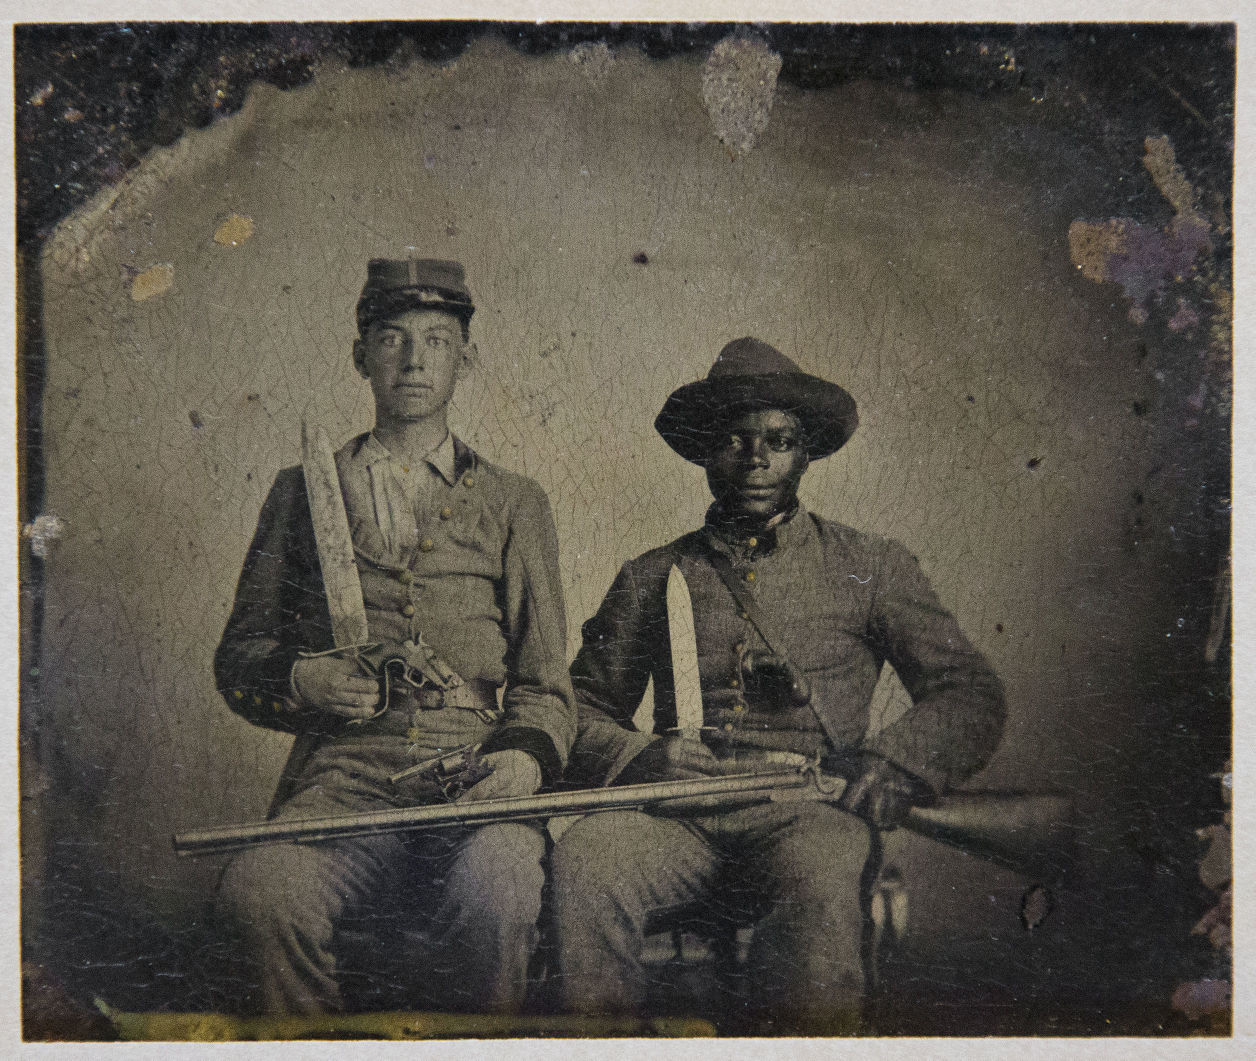 black soldiers in the civil war in the navy